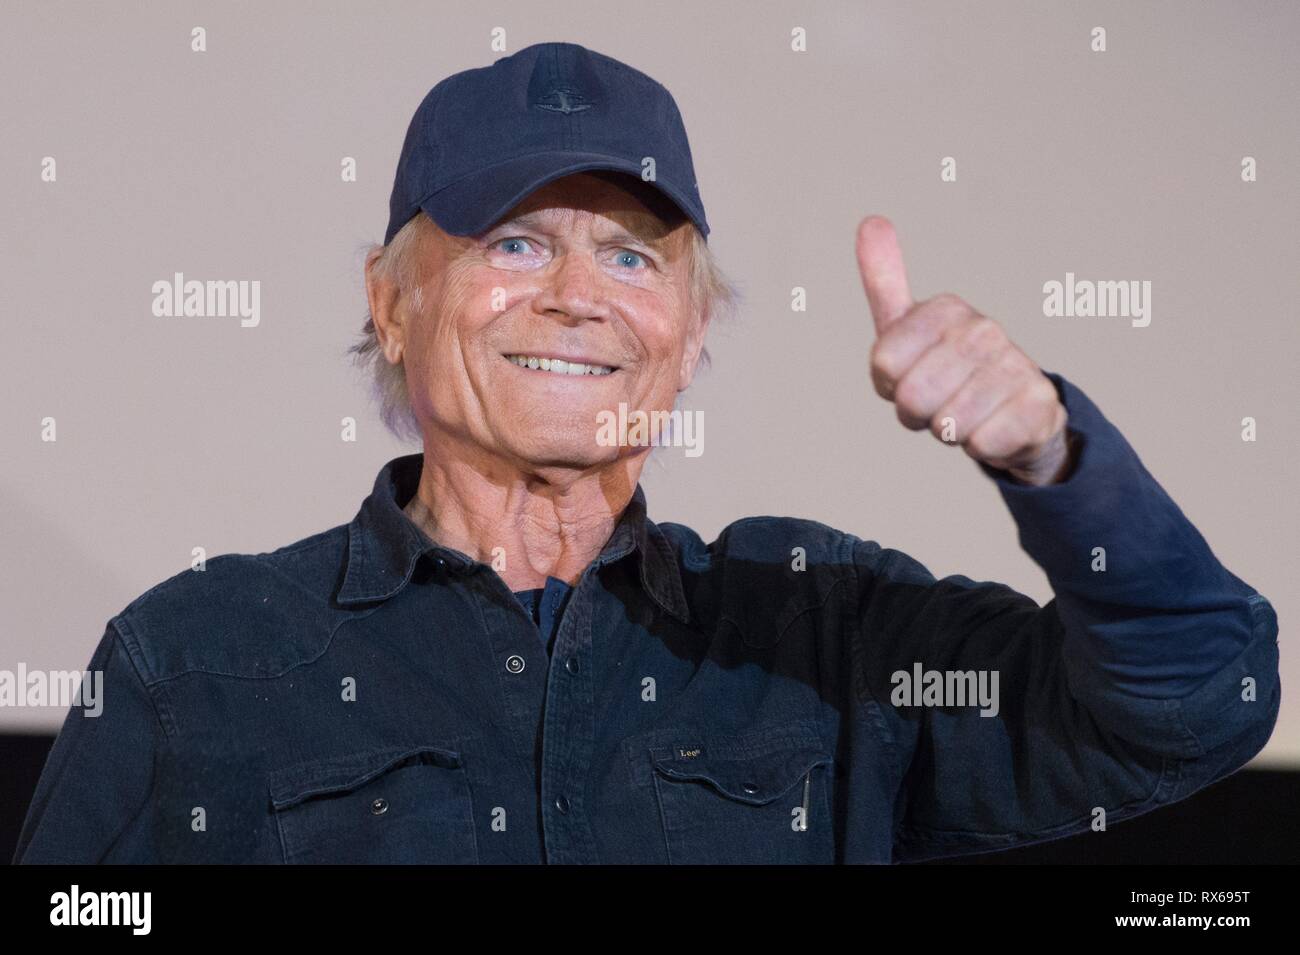 Dresden, Germany. 20th Aug, 2018. The Italian actor Terence Hill comes to the German premiere of his film "Mein Name ist Somebody - Zwei Fäuste kekehren zurück". Hill also directed and wrote the tragicomedy. Credit: Sebastian Kahnert/dpa-Zentralbild/dpa | usage worldwide/dpa/Alamy Live News Stock Photo